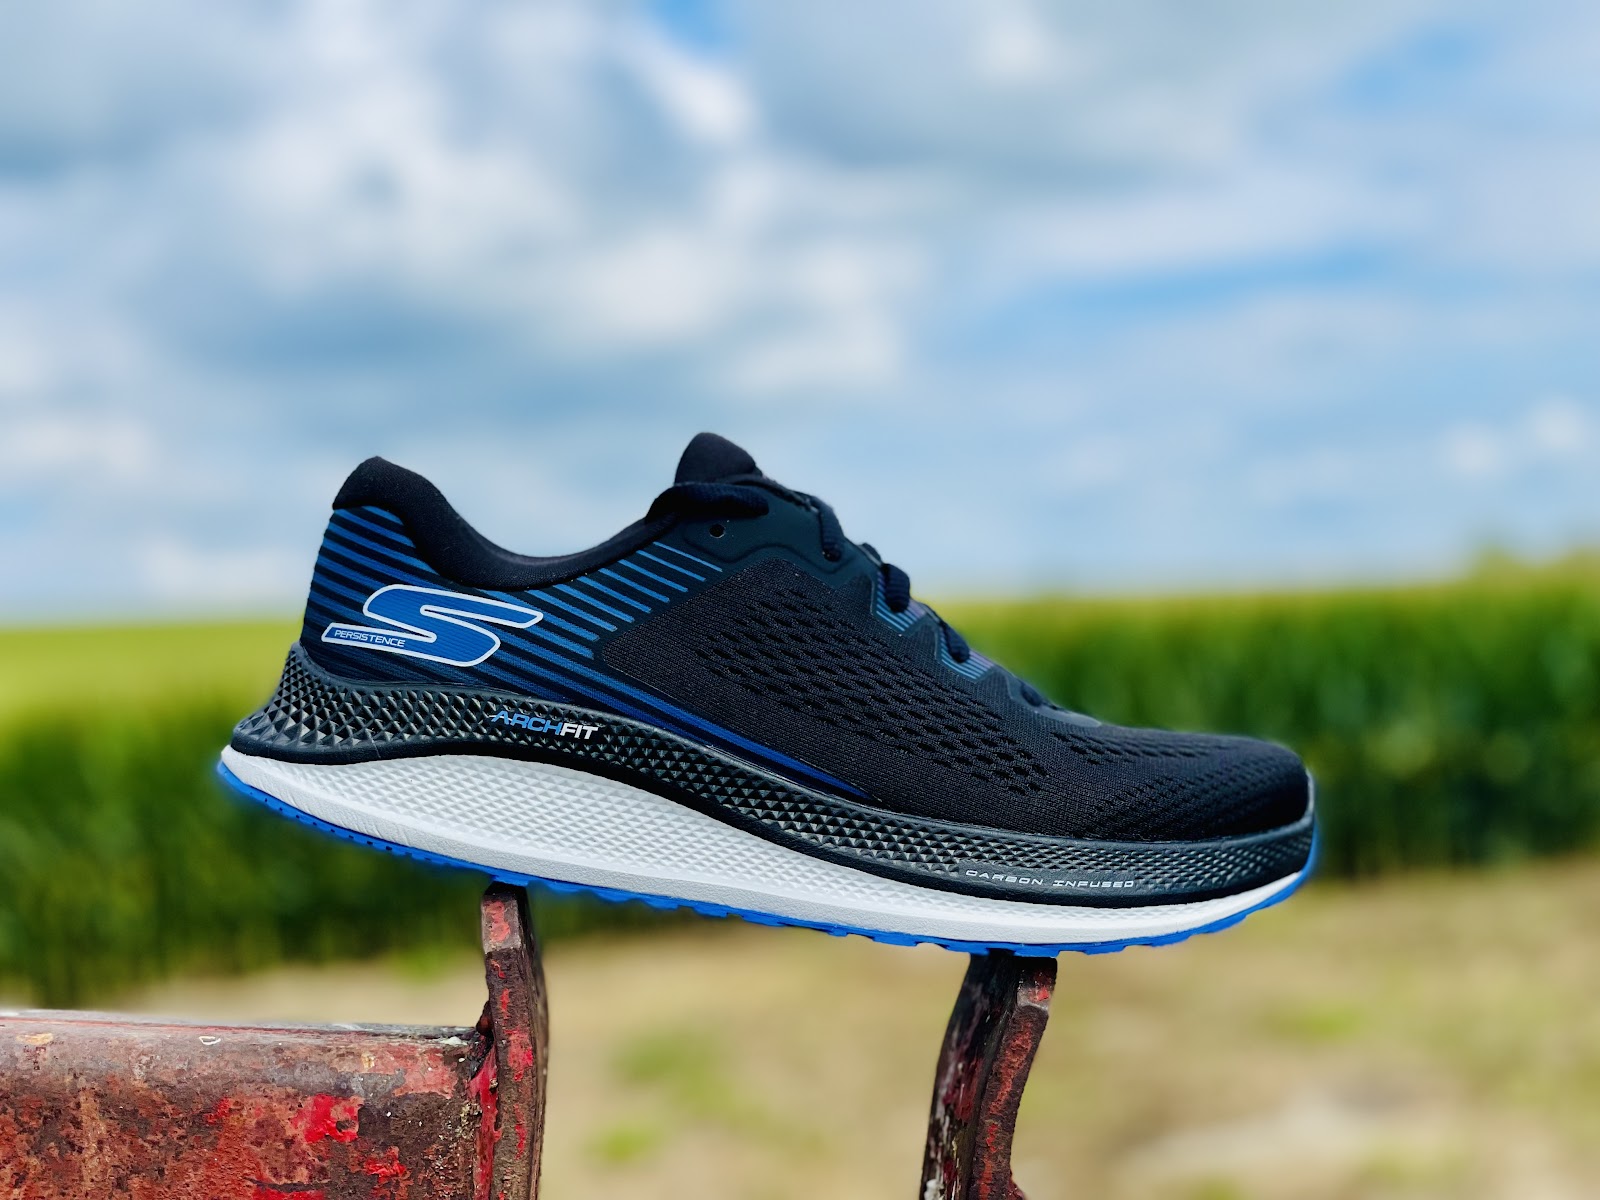 Road Run: Skechers GO Run Persistence Multi Tester Review & New Craft Beer/Shoe Pairing! Comparisons